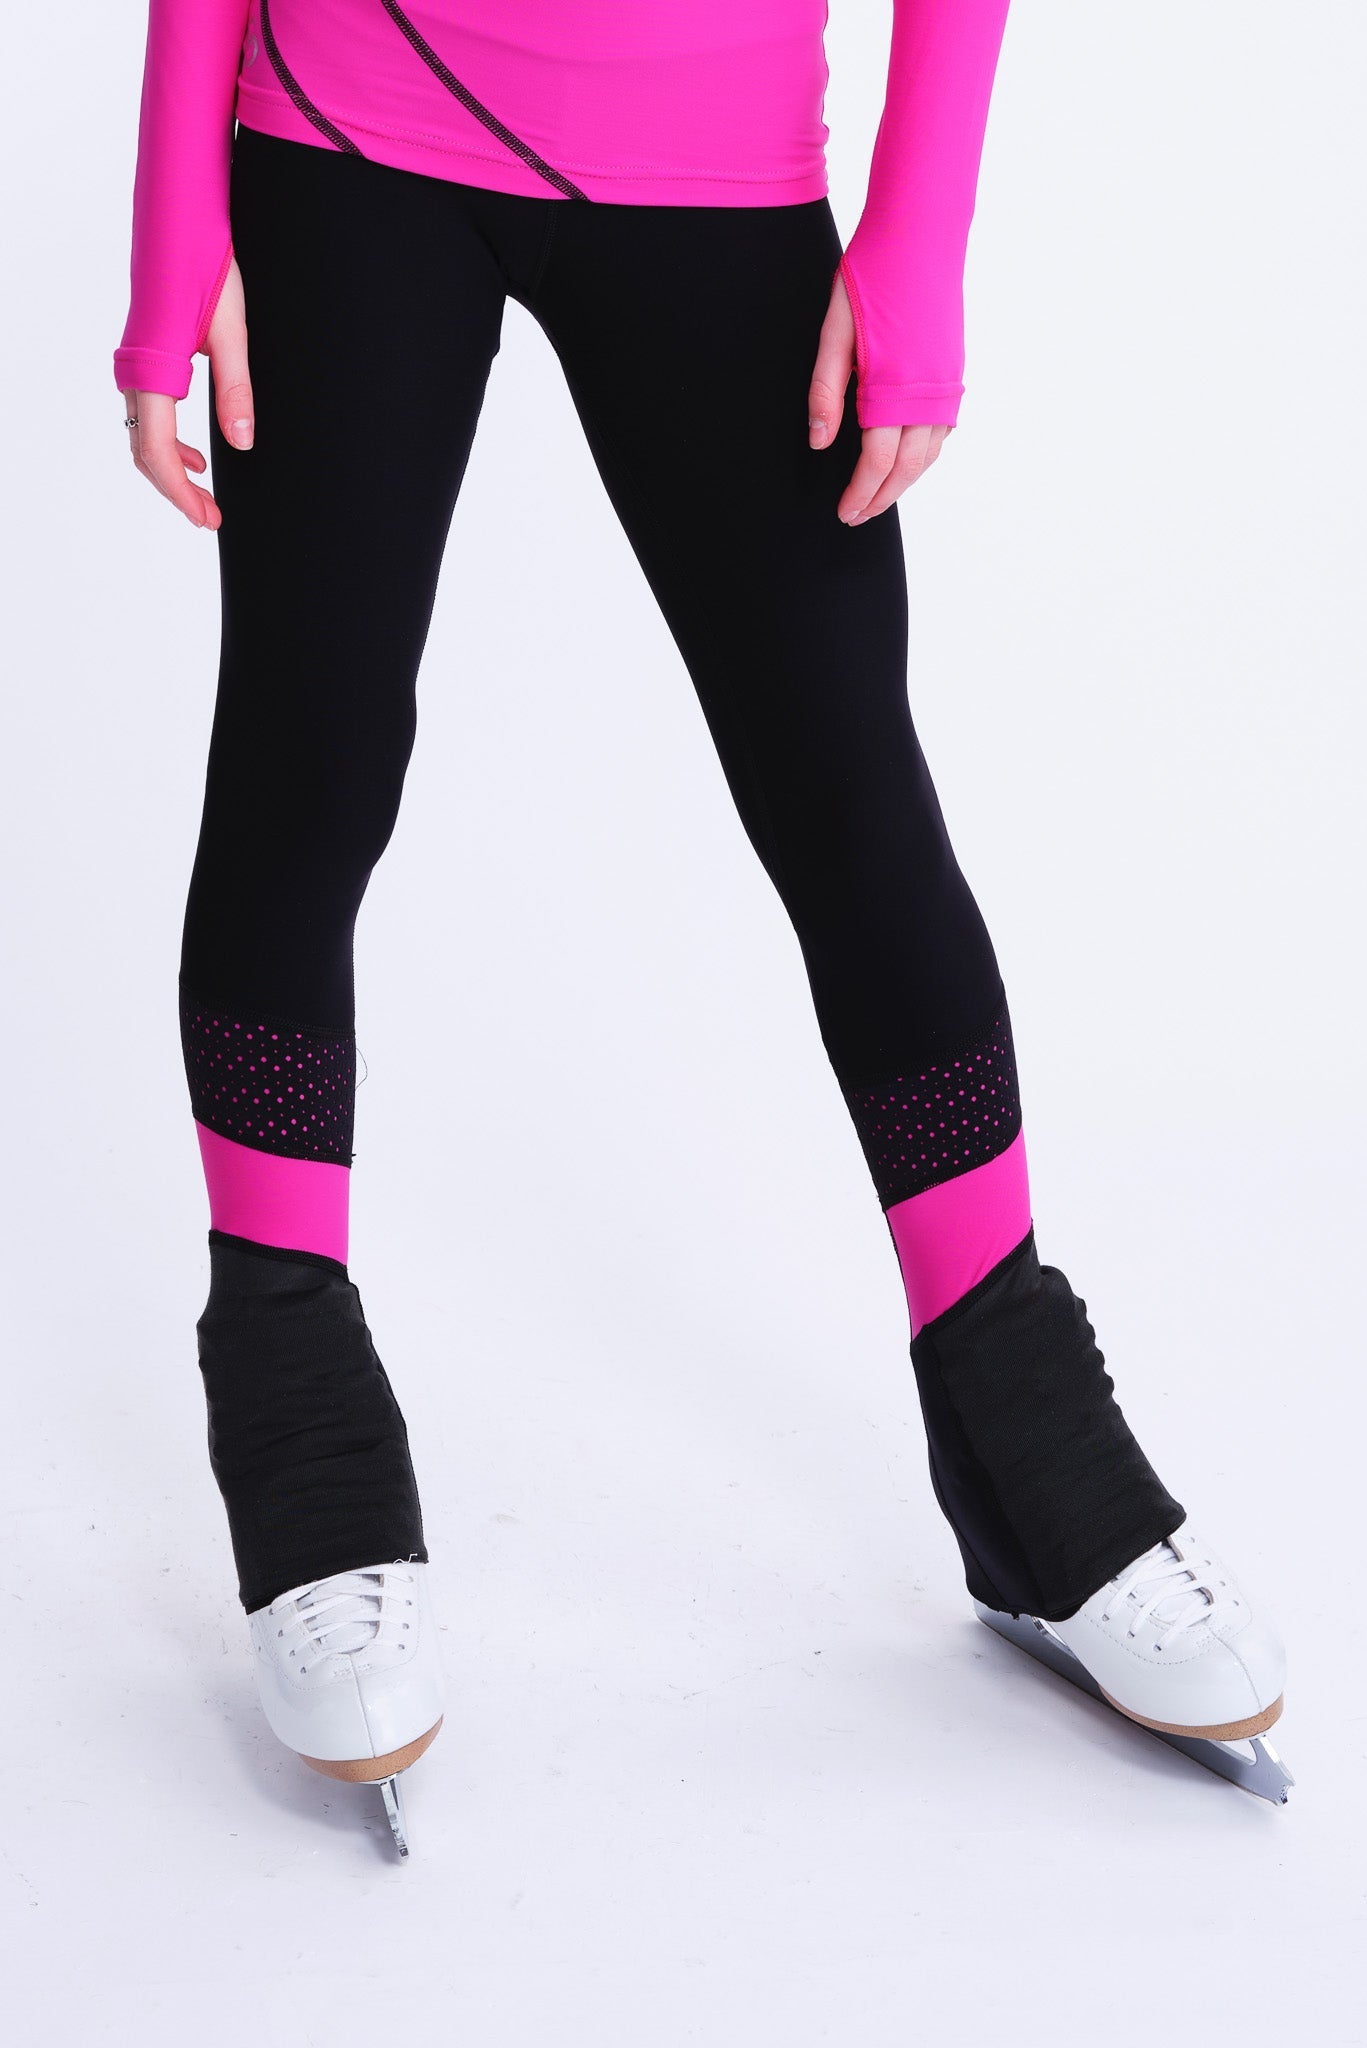 Legging and Top Skating set - faded pink - SPORTS DE GLACE France